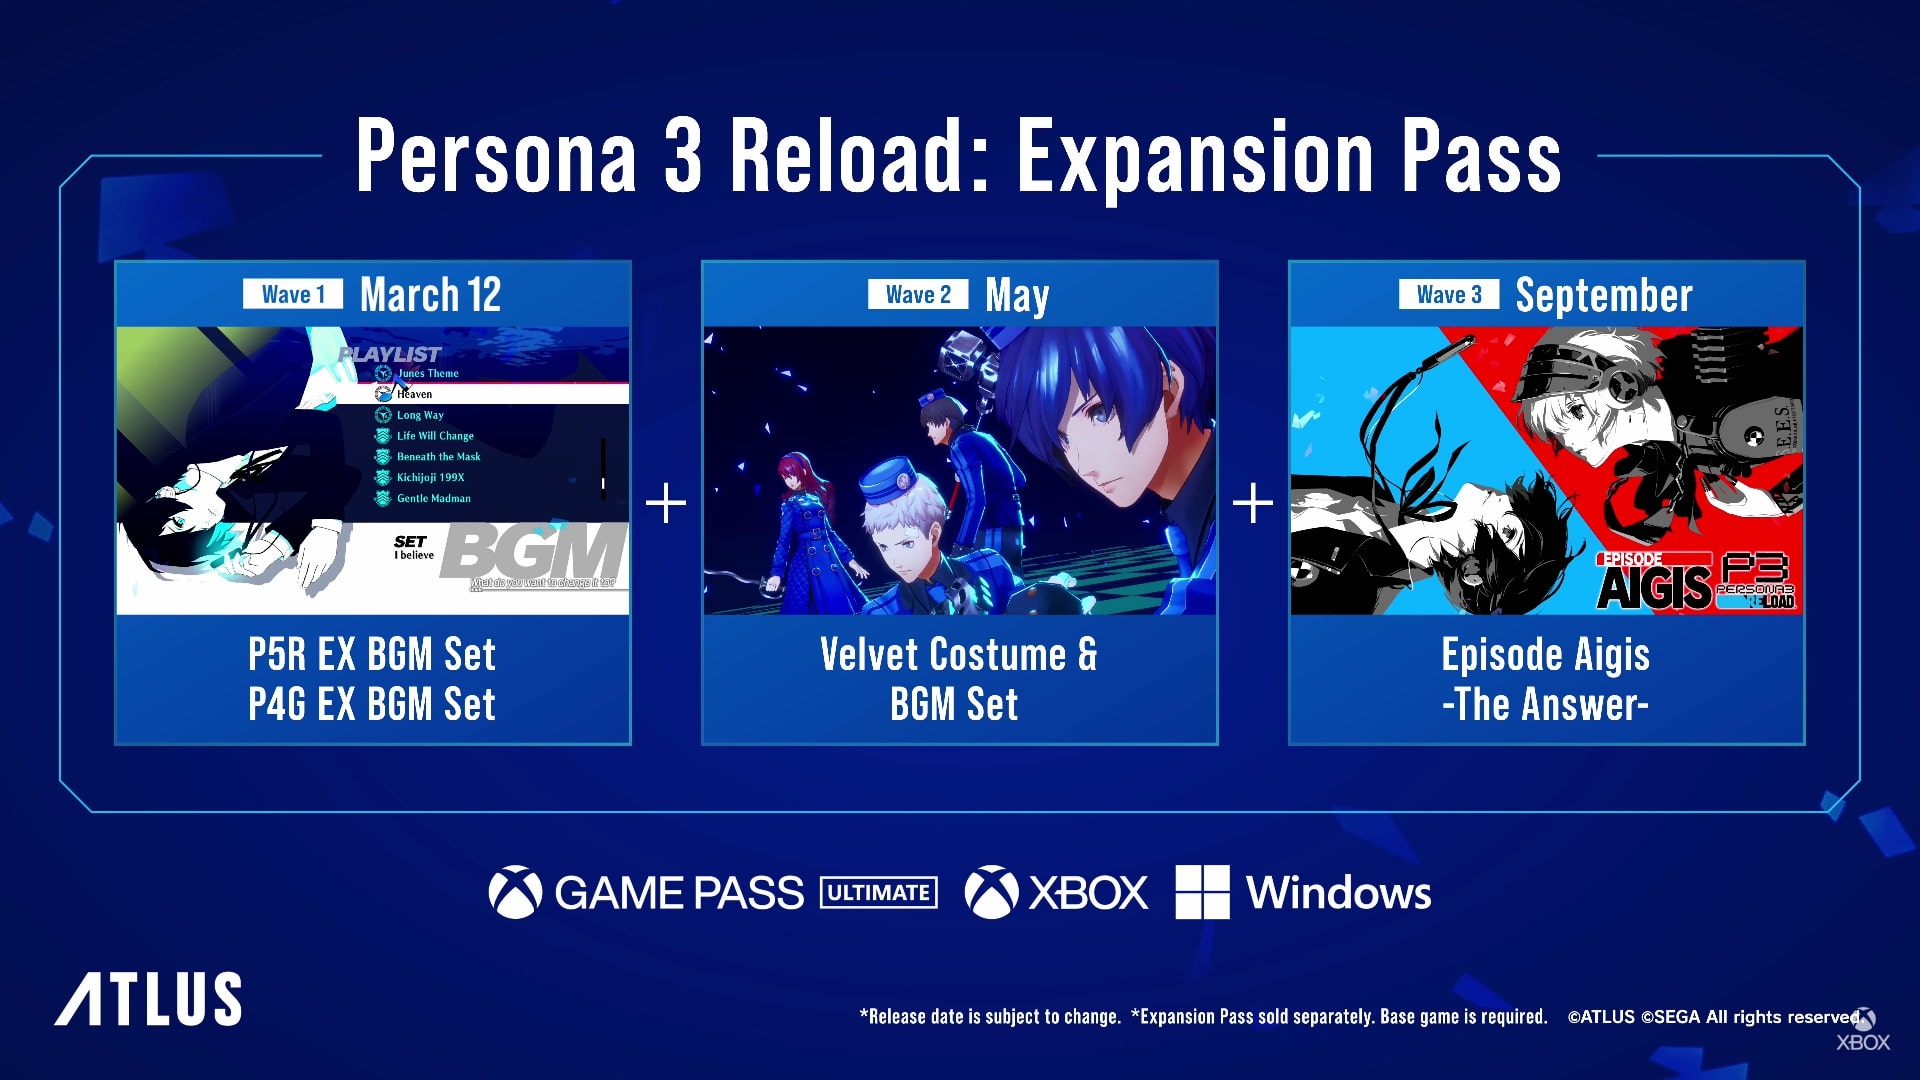 Persona 3 Reload: 'The Answer' DLC Coming Later This Year As The Final Chapter Expansion